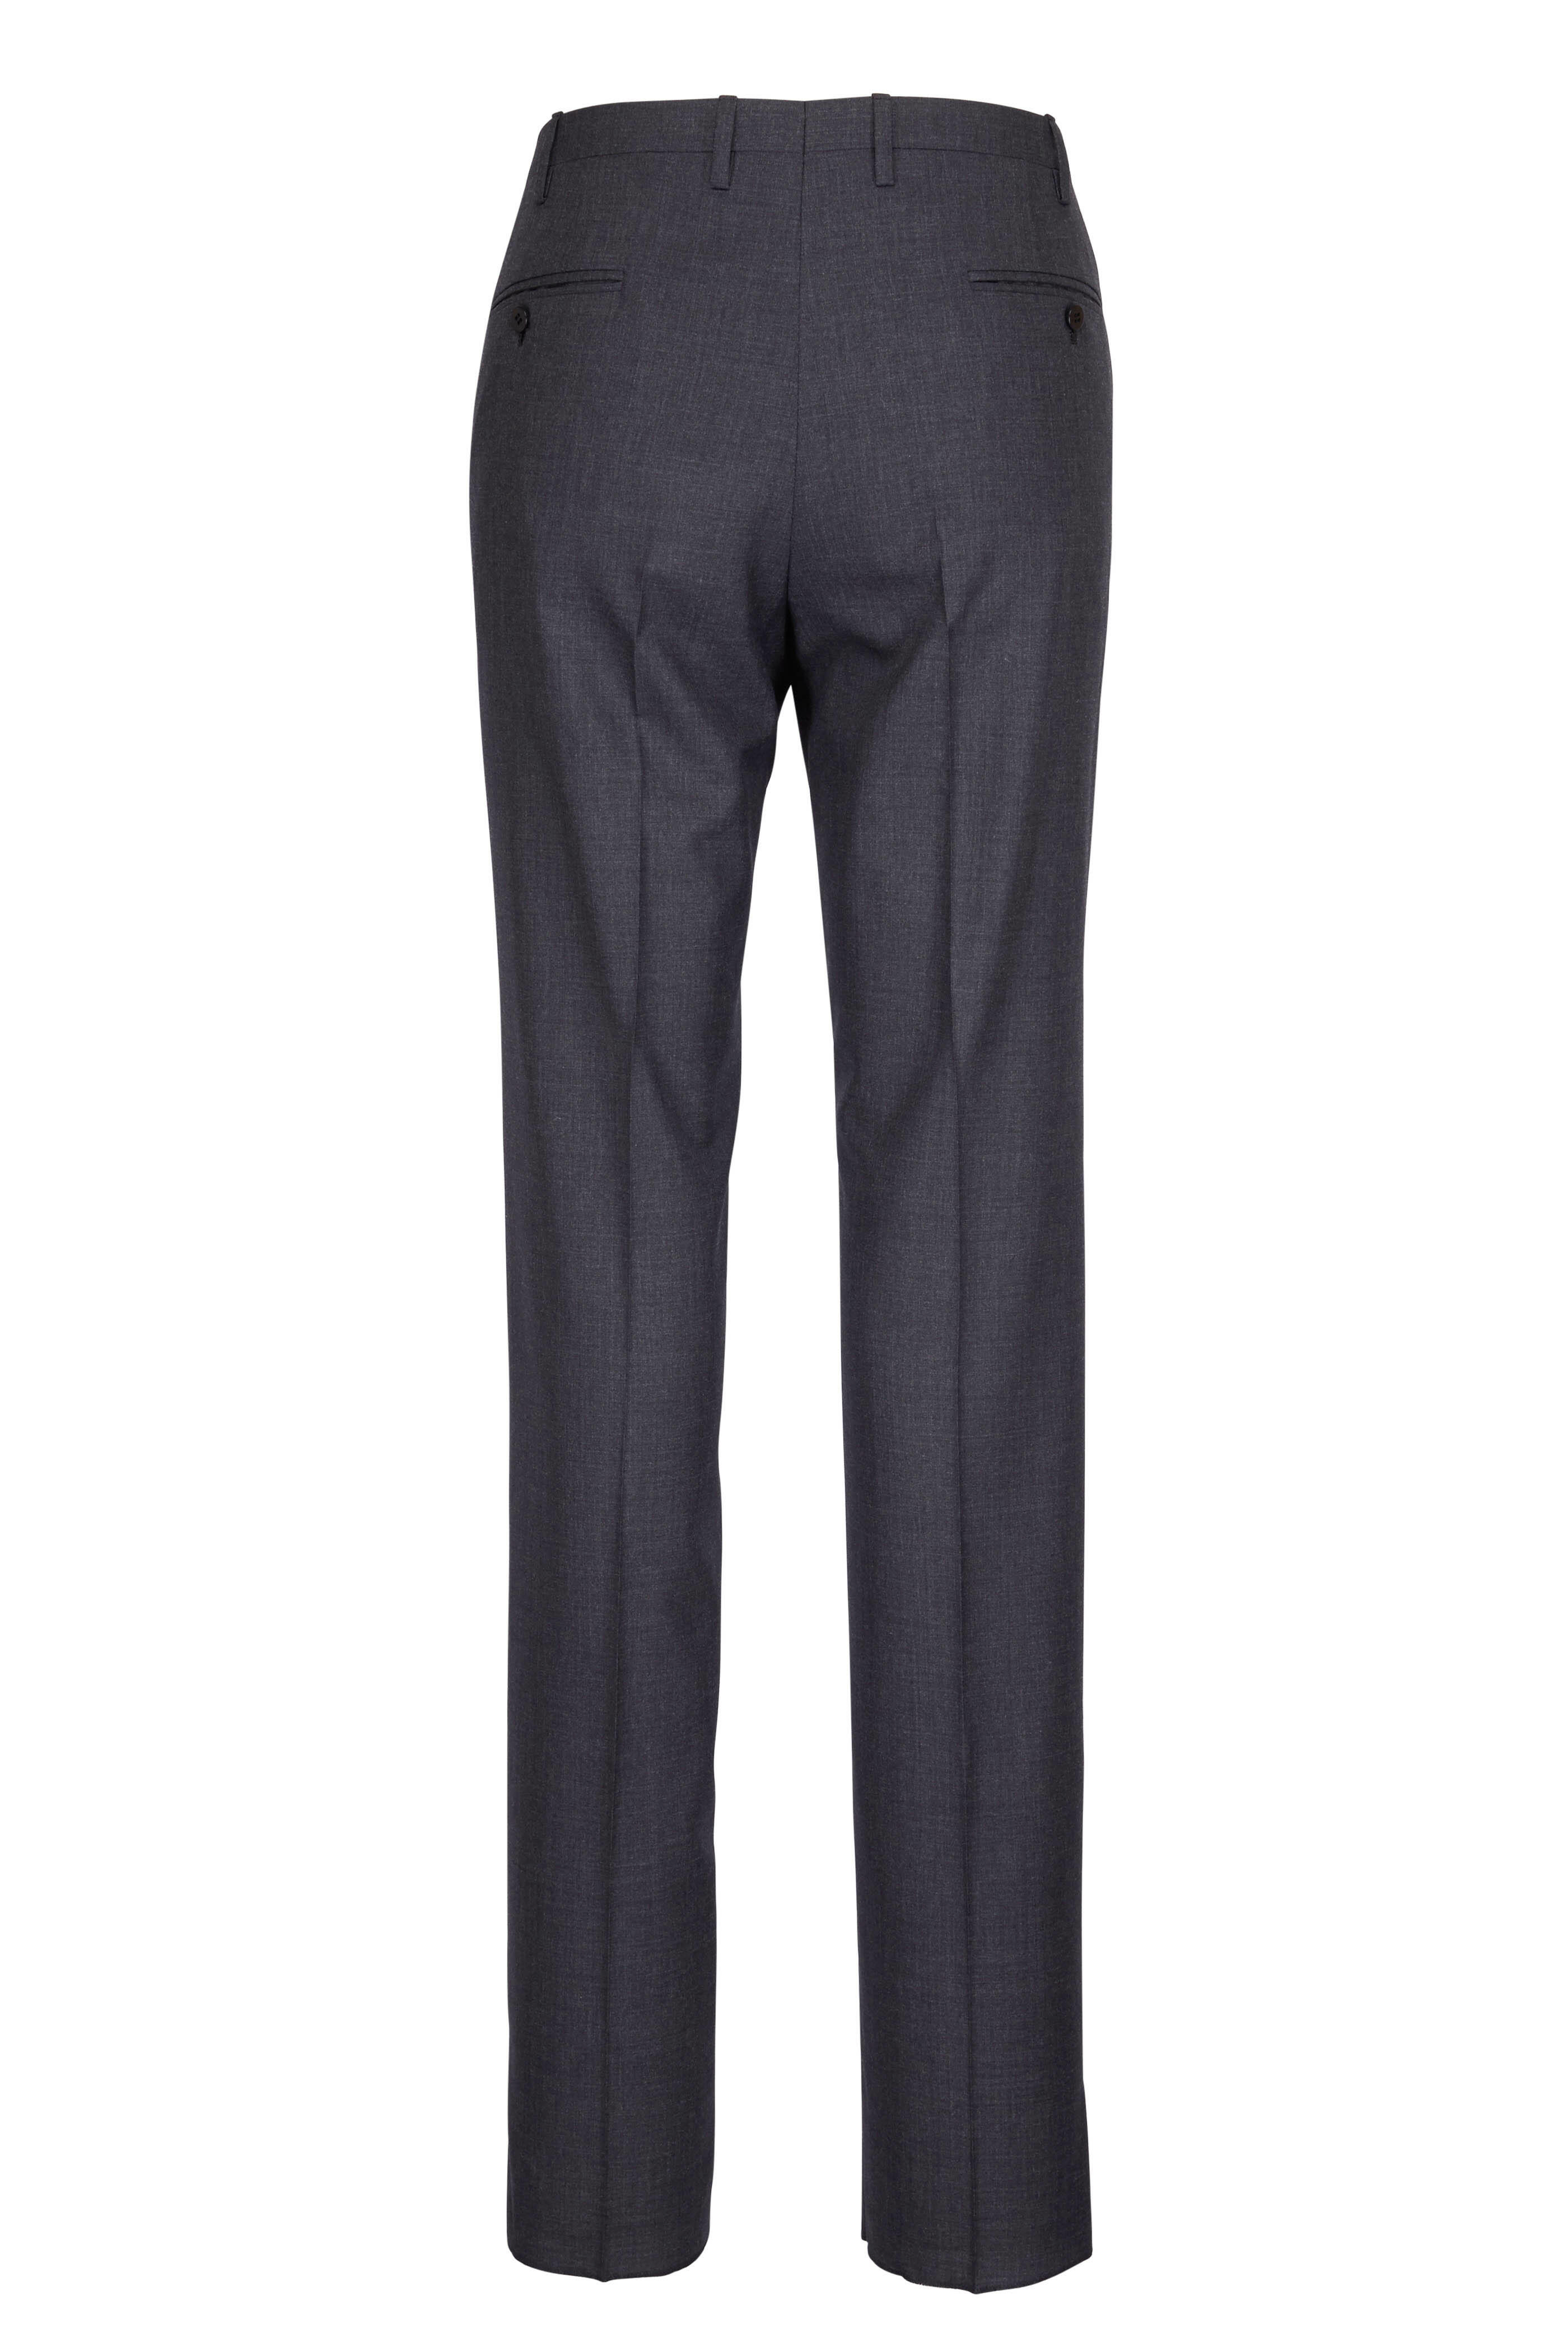 Kiton - Solid Charcoal Gray Wool Pant | Mitchell Stores